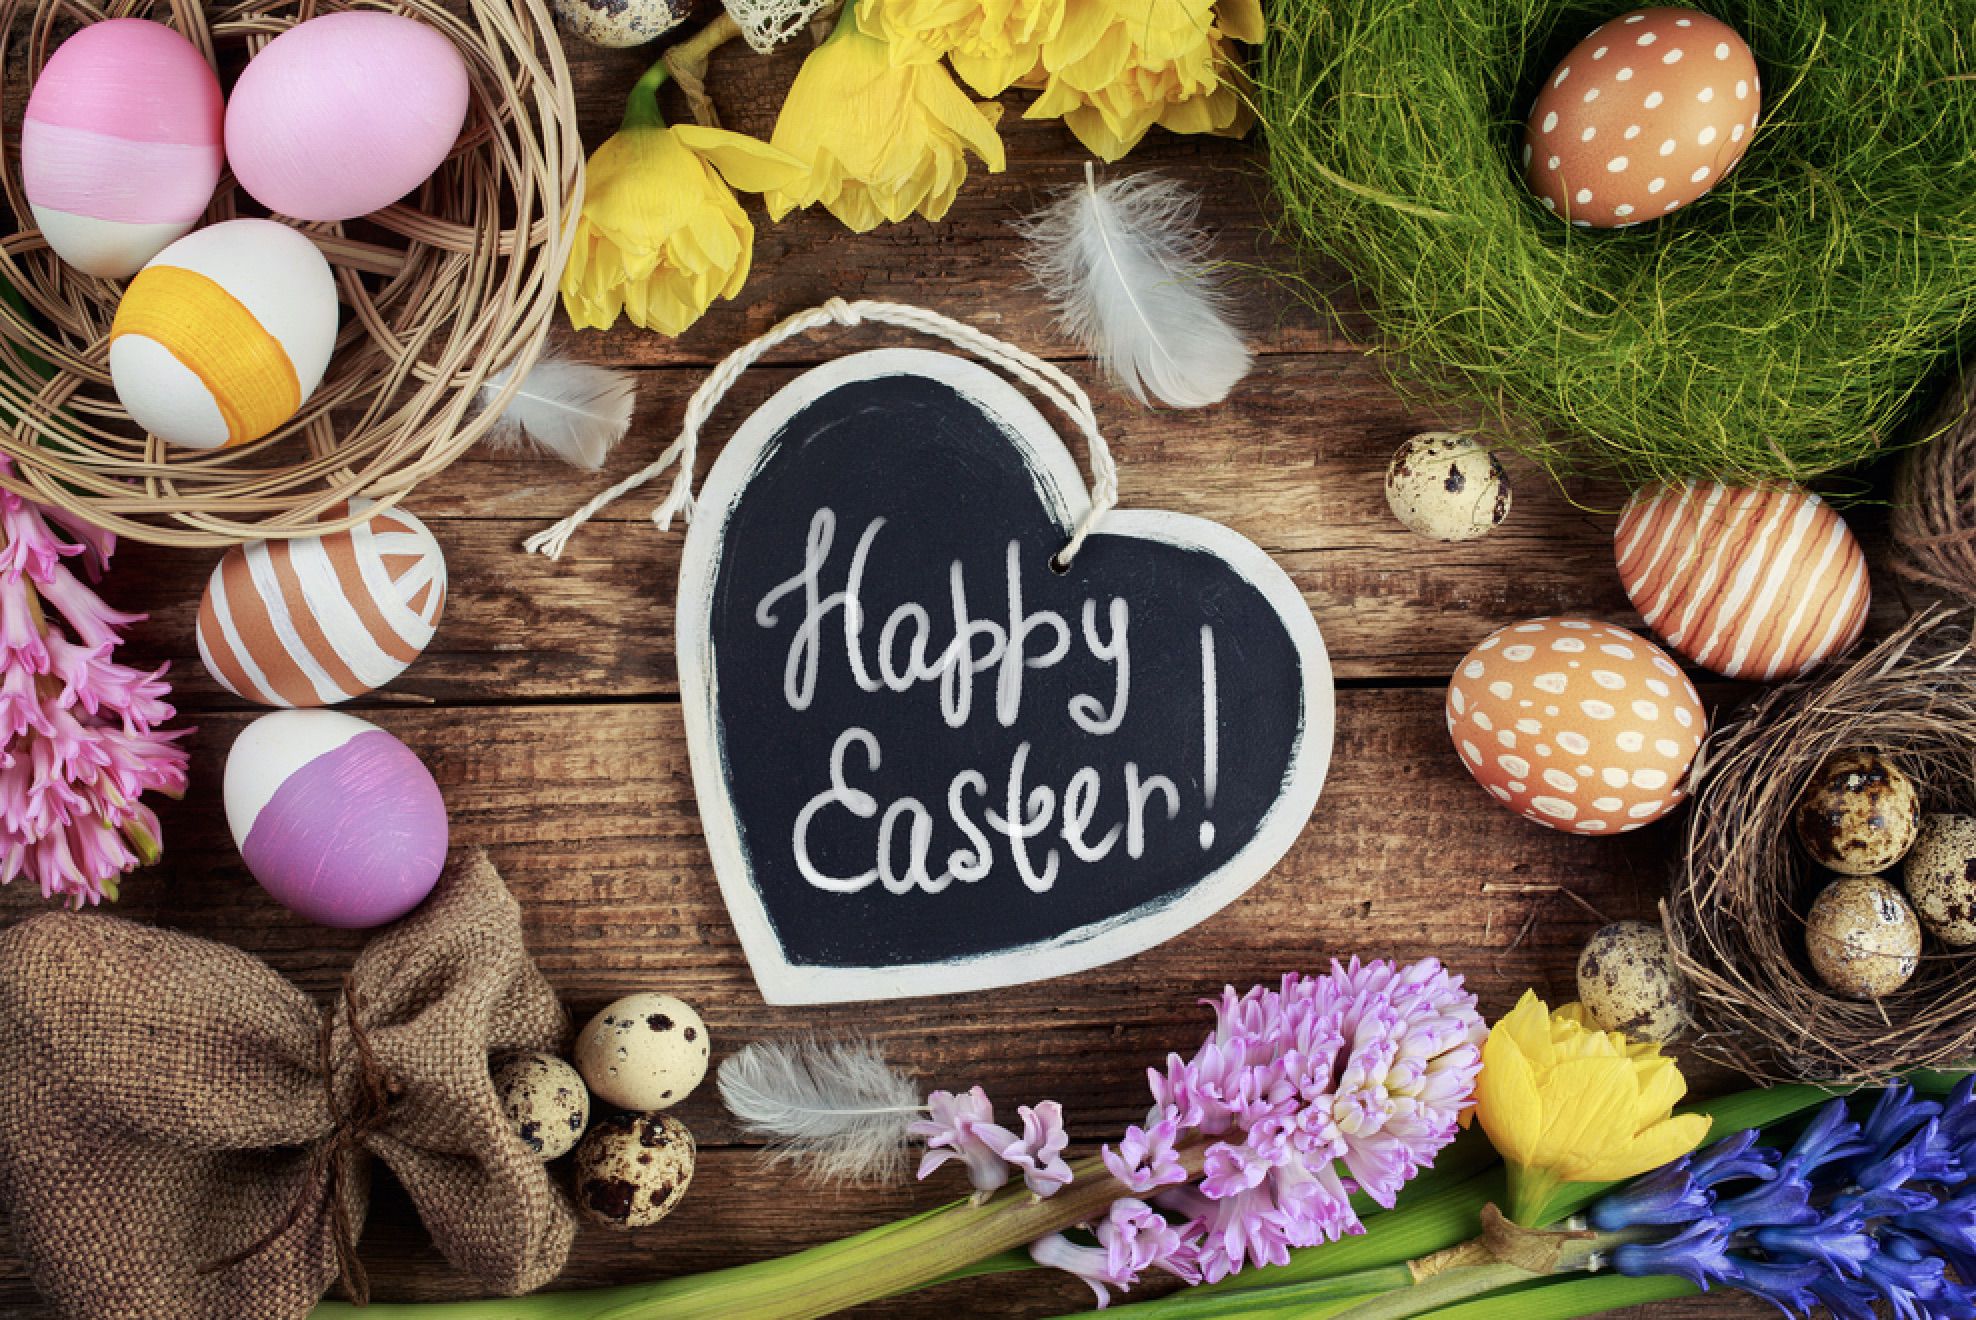 Wishing  You A Happy and Safe Easter